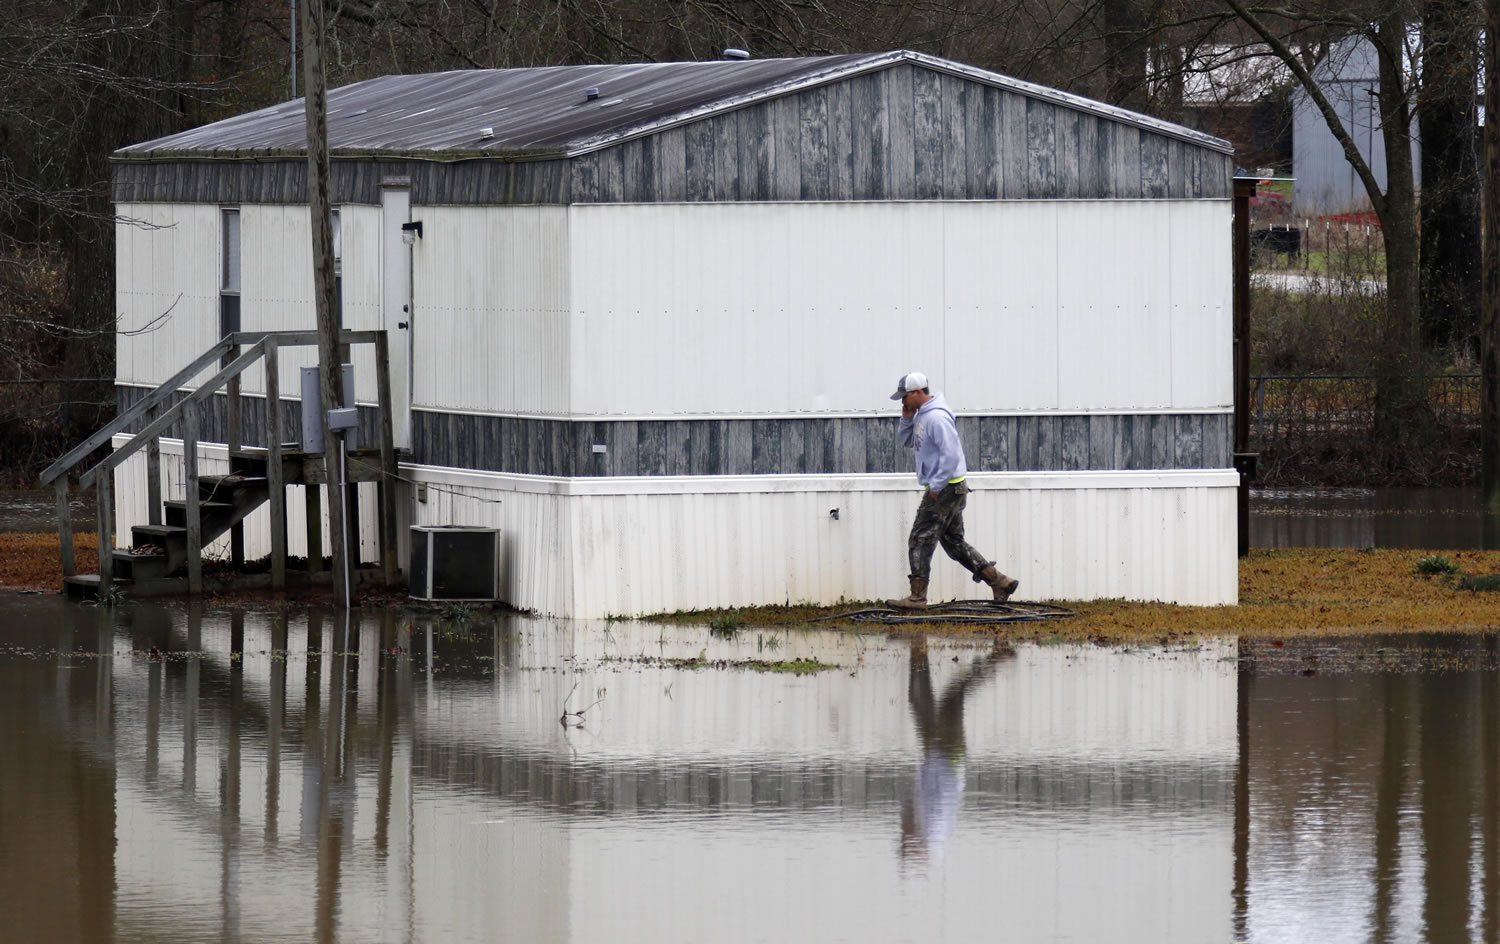 An area resident walks carefully around the Pelahatchie Creek floodwaters that surround a mobile home adjacent to U.S. Highway 80 East near Pelahatchie, Miss., on Wednesday as several communities in east Mississippi dealt with flash flooding from the severe weather that swept through Mississippi and other states on Tuesday. The National Weather Service is trying to determine how many tornadoes touched down in Mississippi. (AP Photo/Rogelio V.